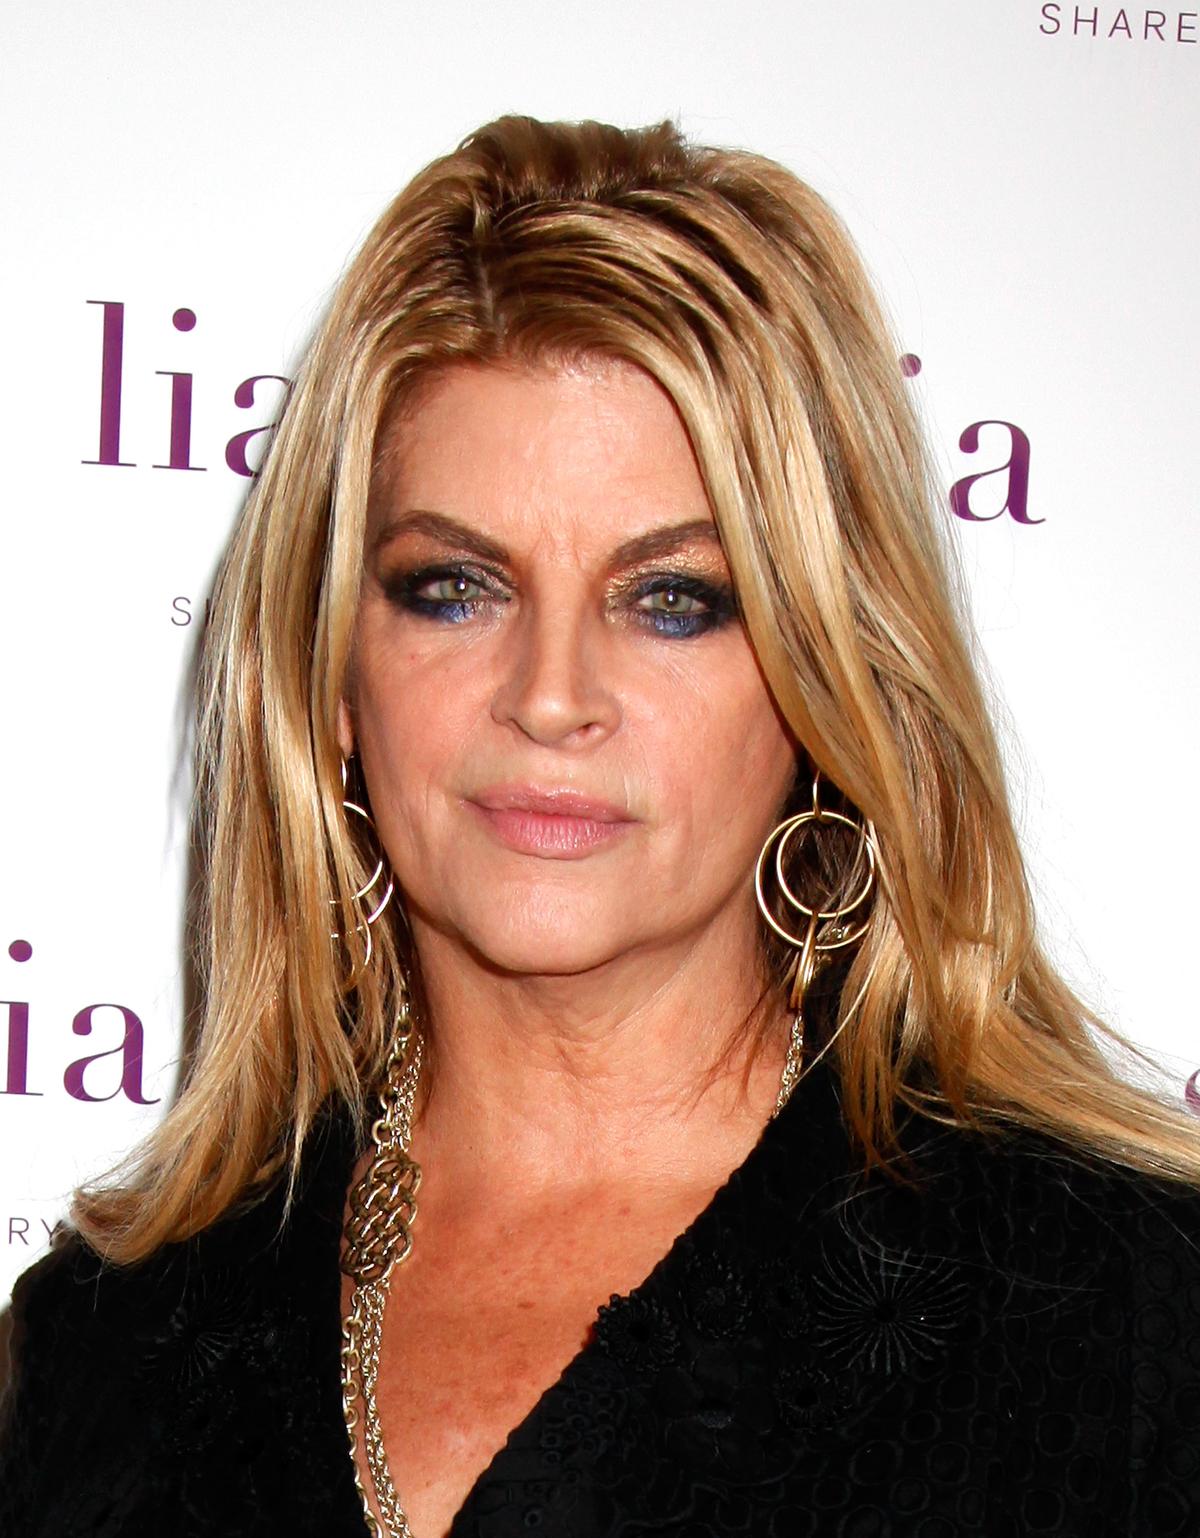 Kirstie Alley Slams Abercrombie & Fitch